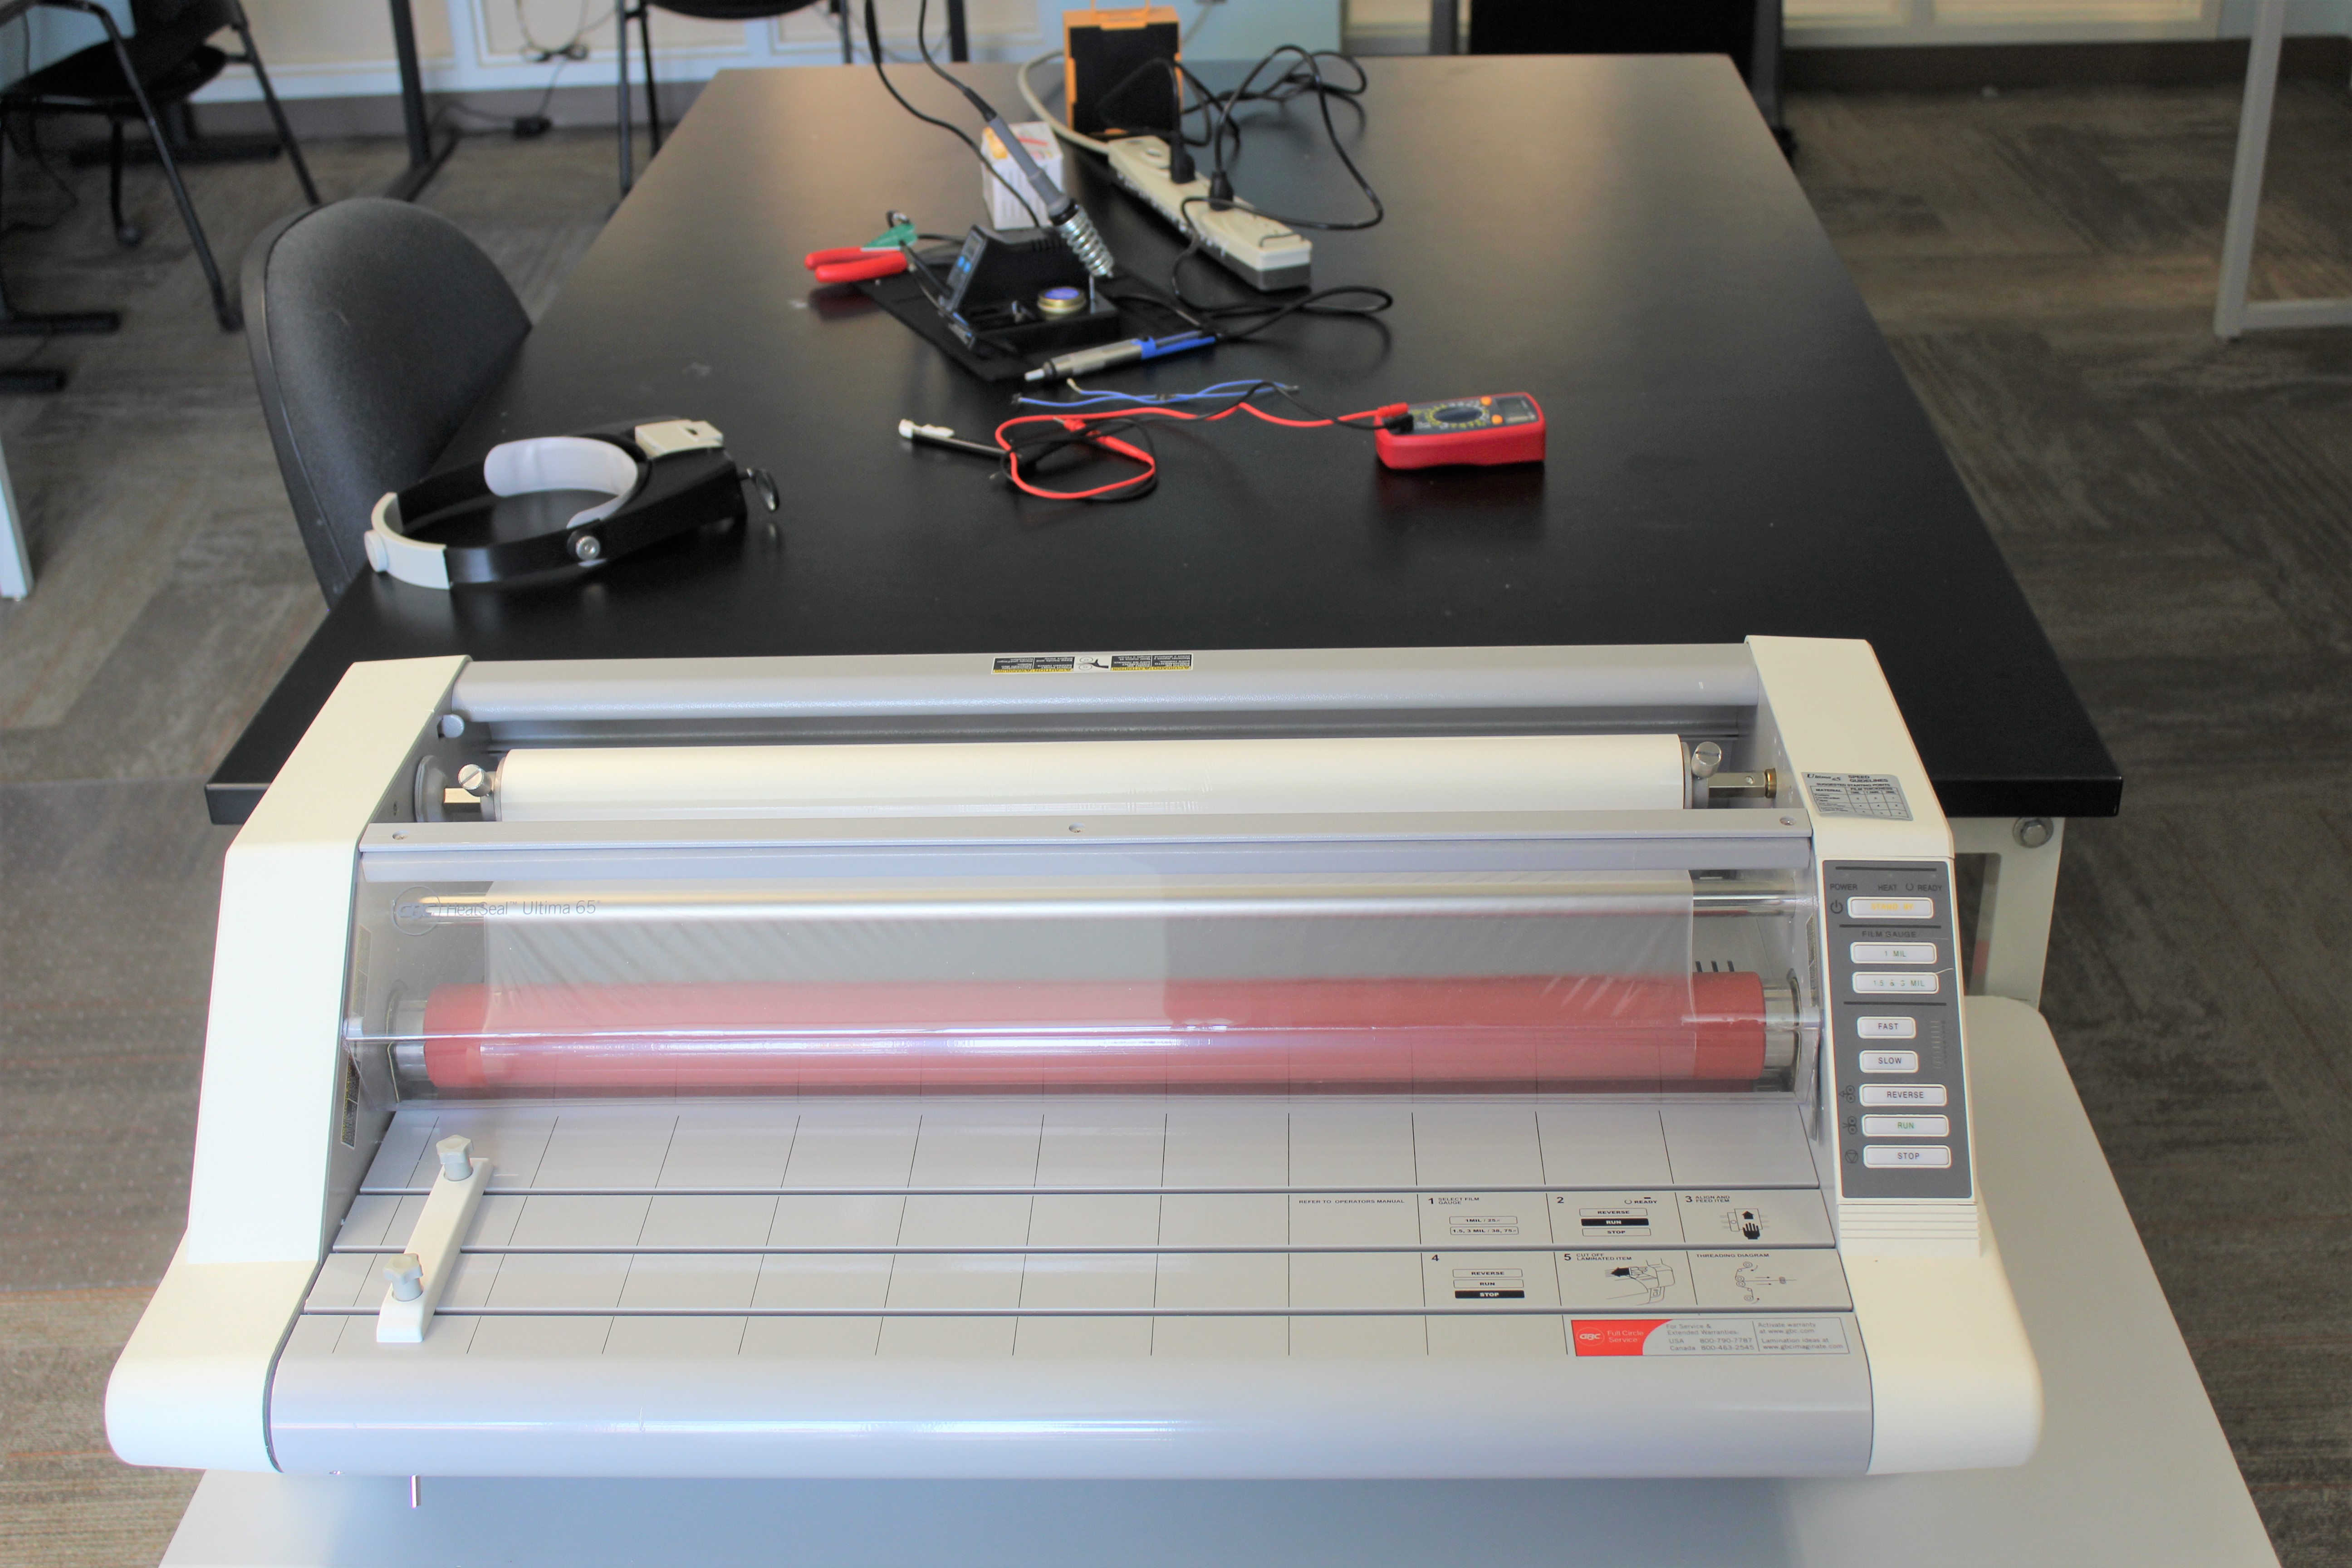 Laminator next to a work table with soldering equipment on it.